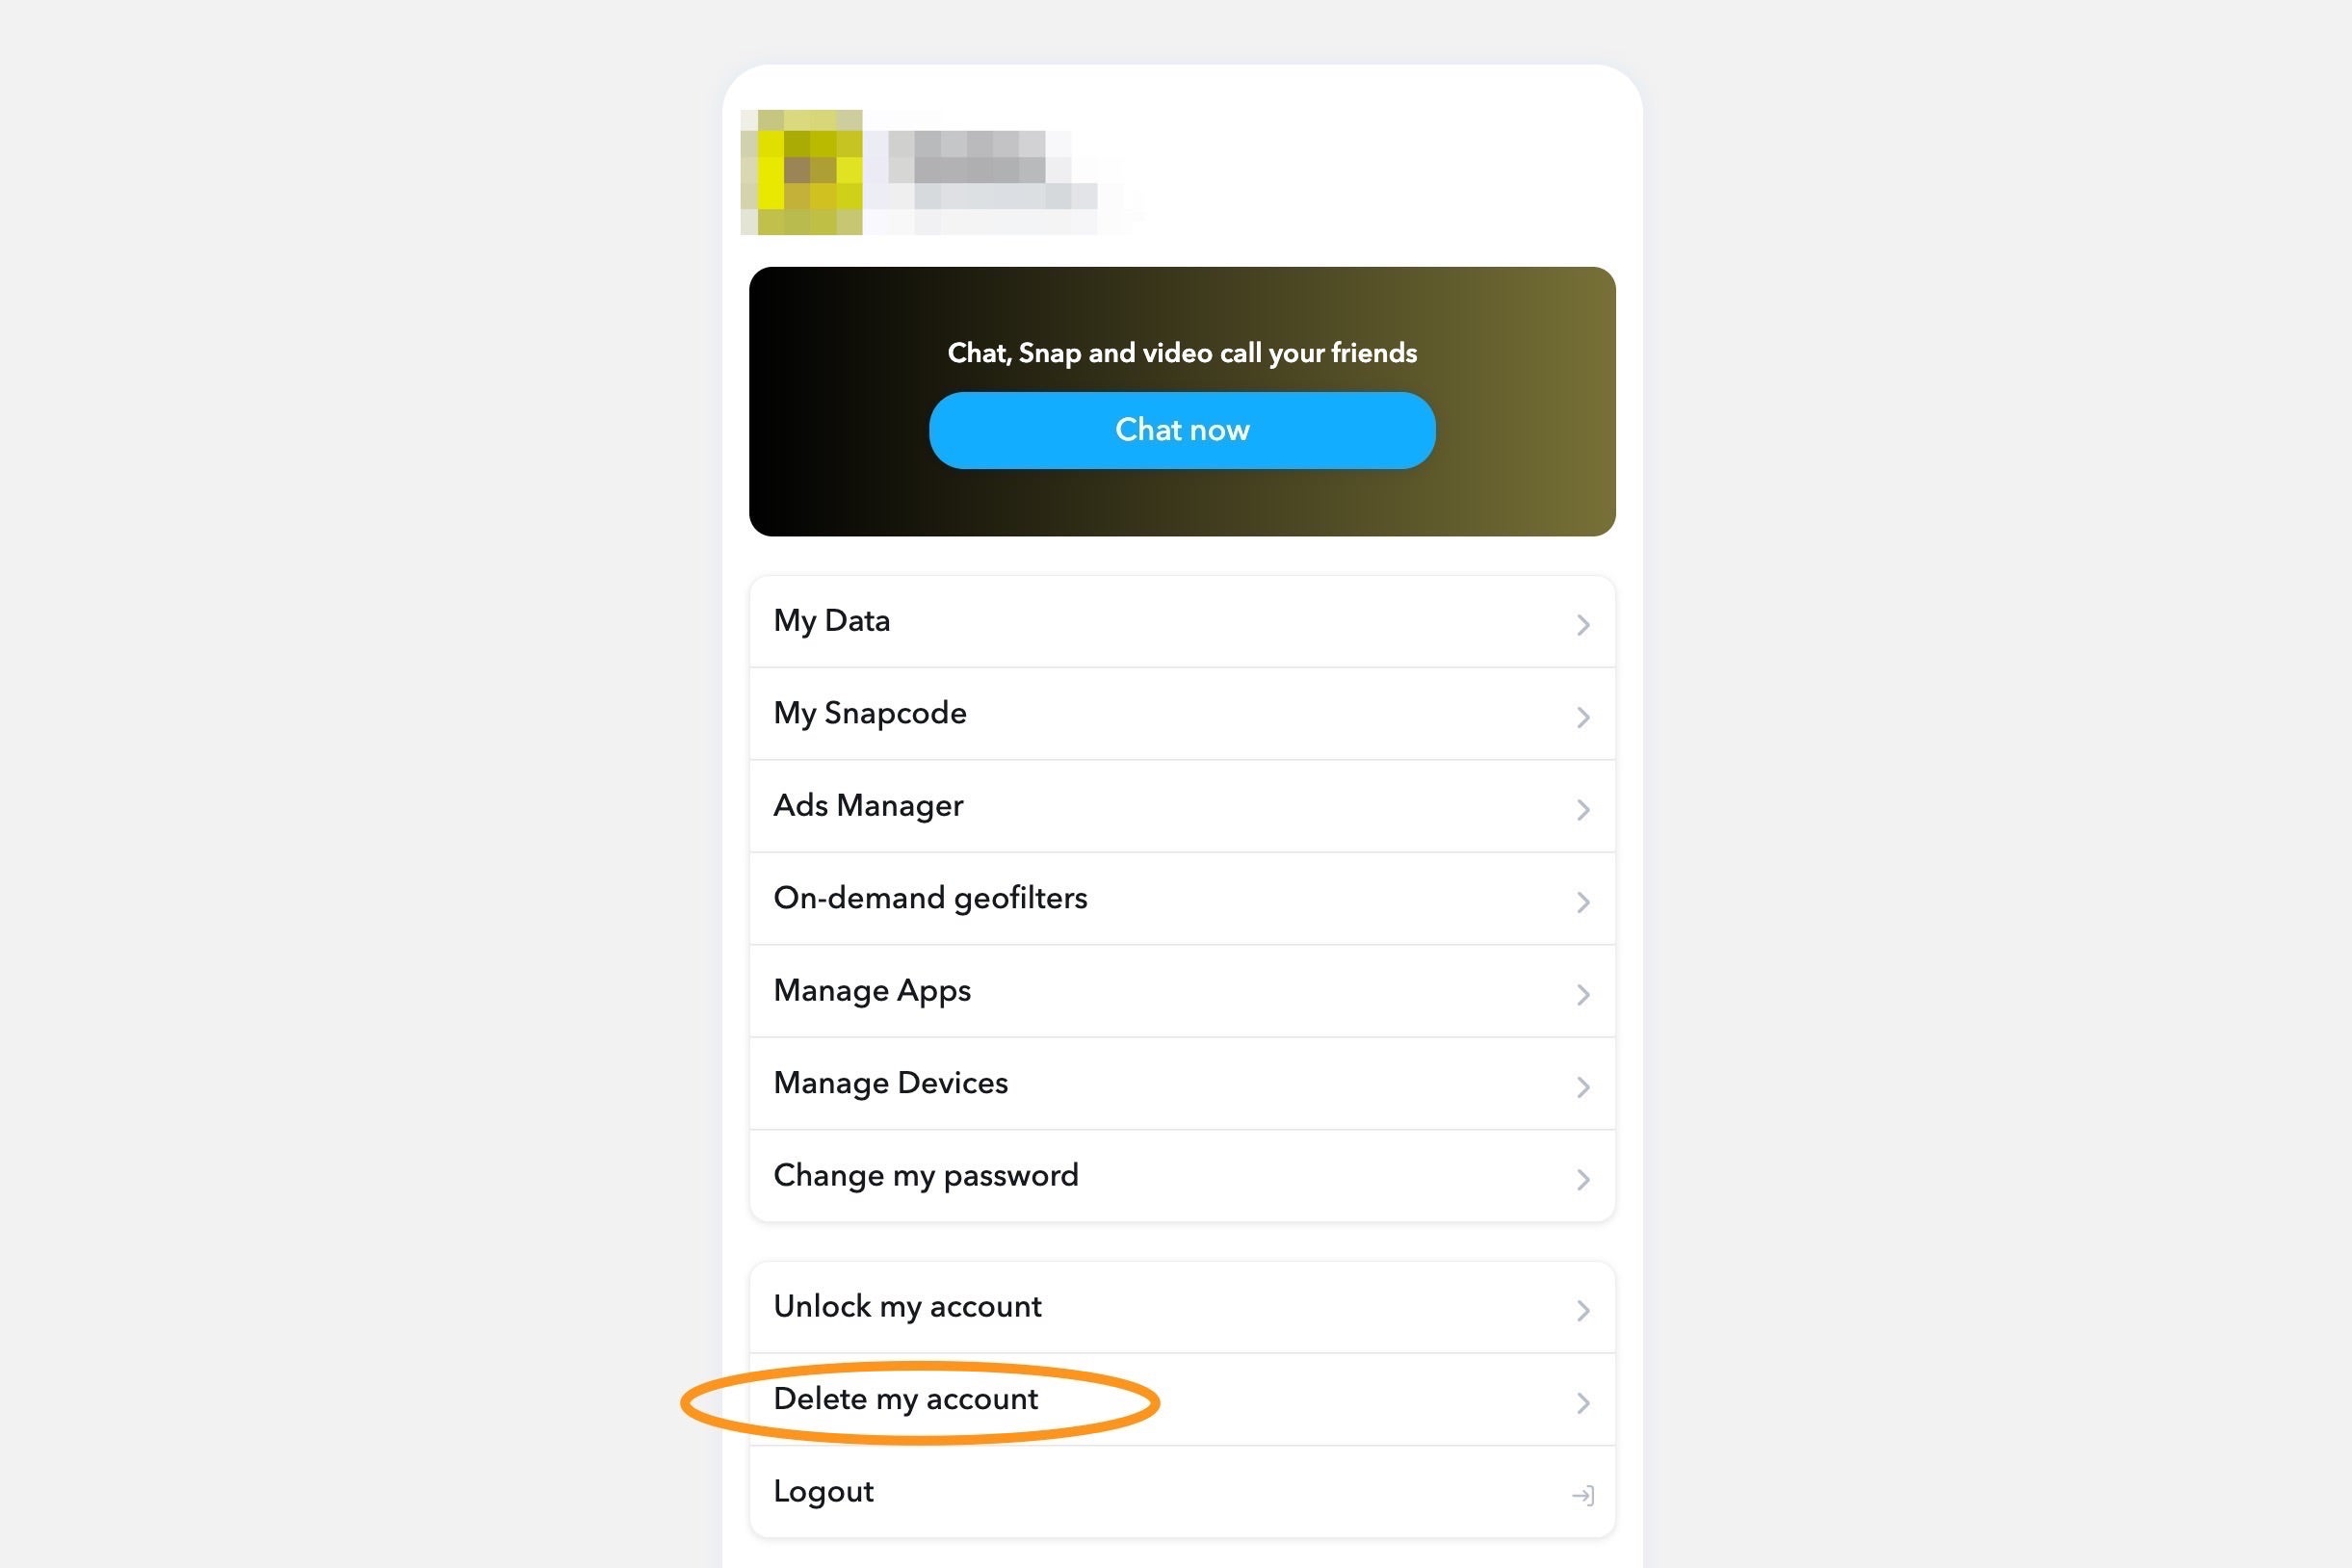 Snapchat's web profile screen, showing where to find the option to delete your Snapchat account.